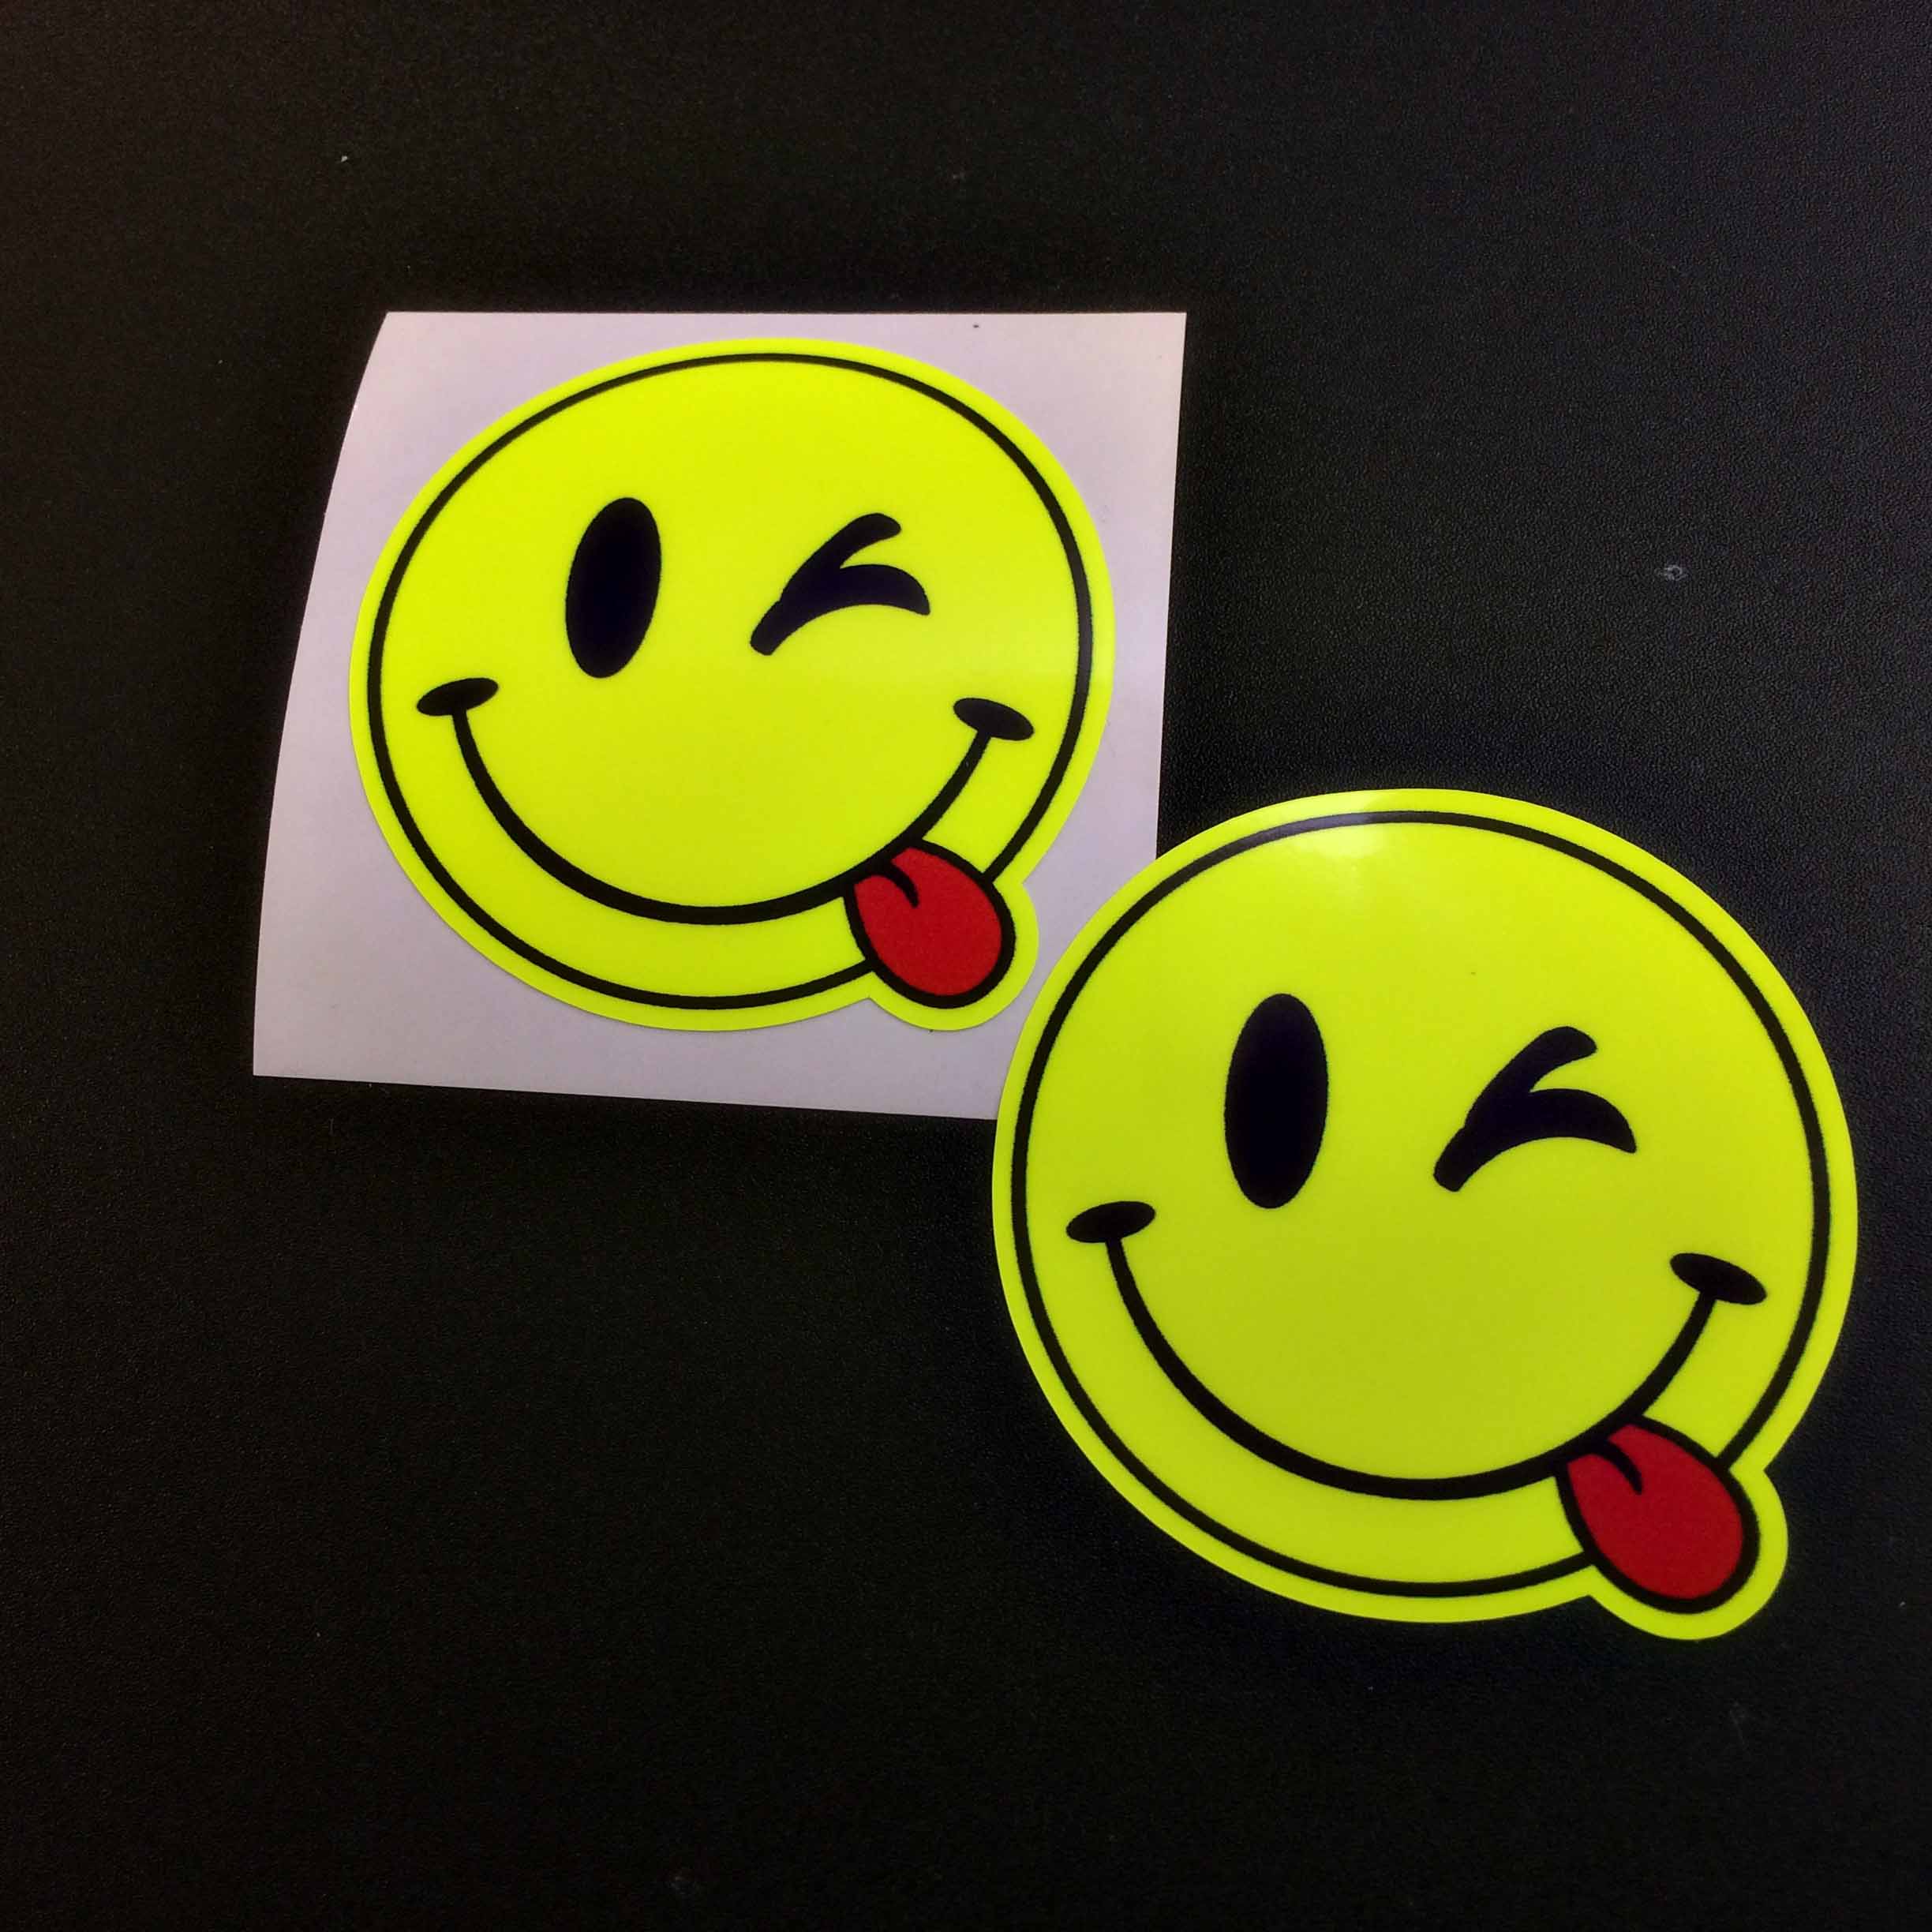 FLUORESCENT CHEEKY SMILEY STICKERS. A fluorescent yellow round smiling face. A red tongue is hanging out of the corner of the mouth and one eye is winking.